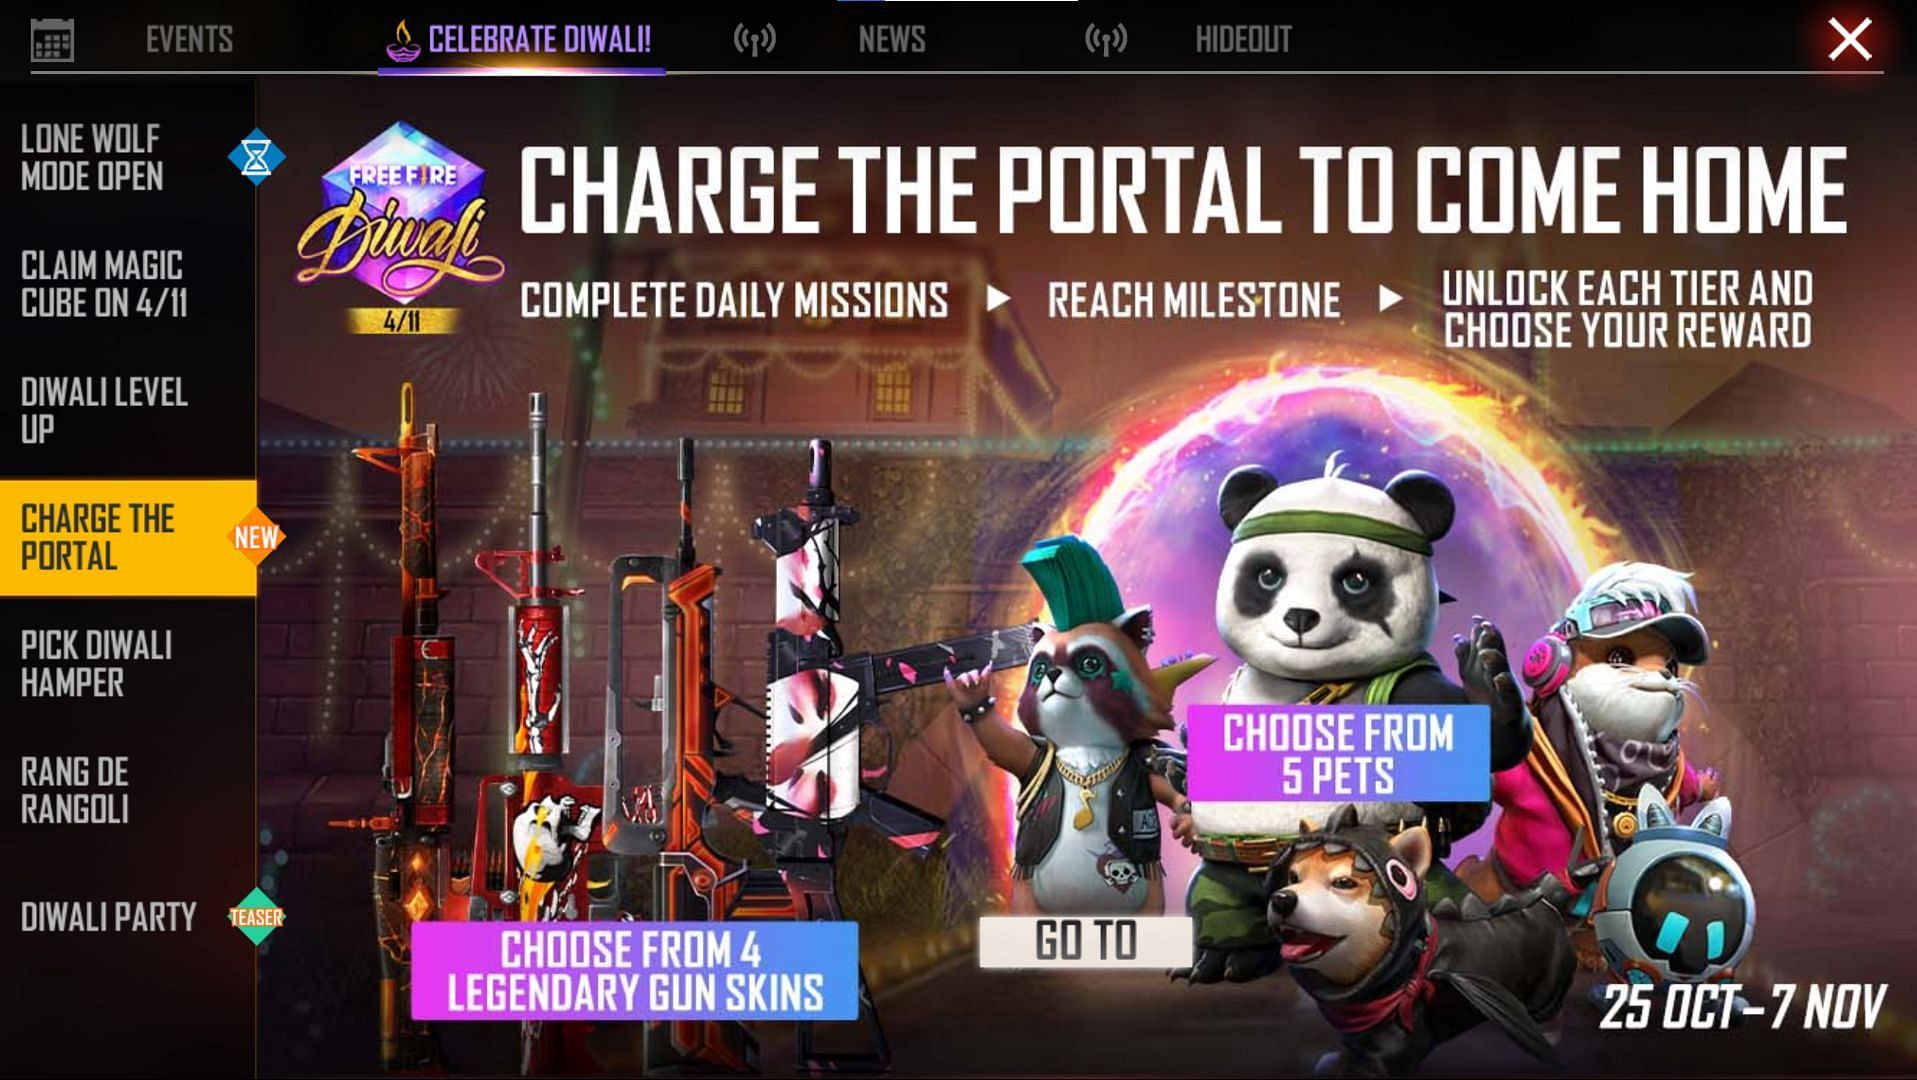 Rewards that users can get from the Charge the Portal event in Free Fire (Image via Free Fire)